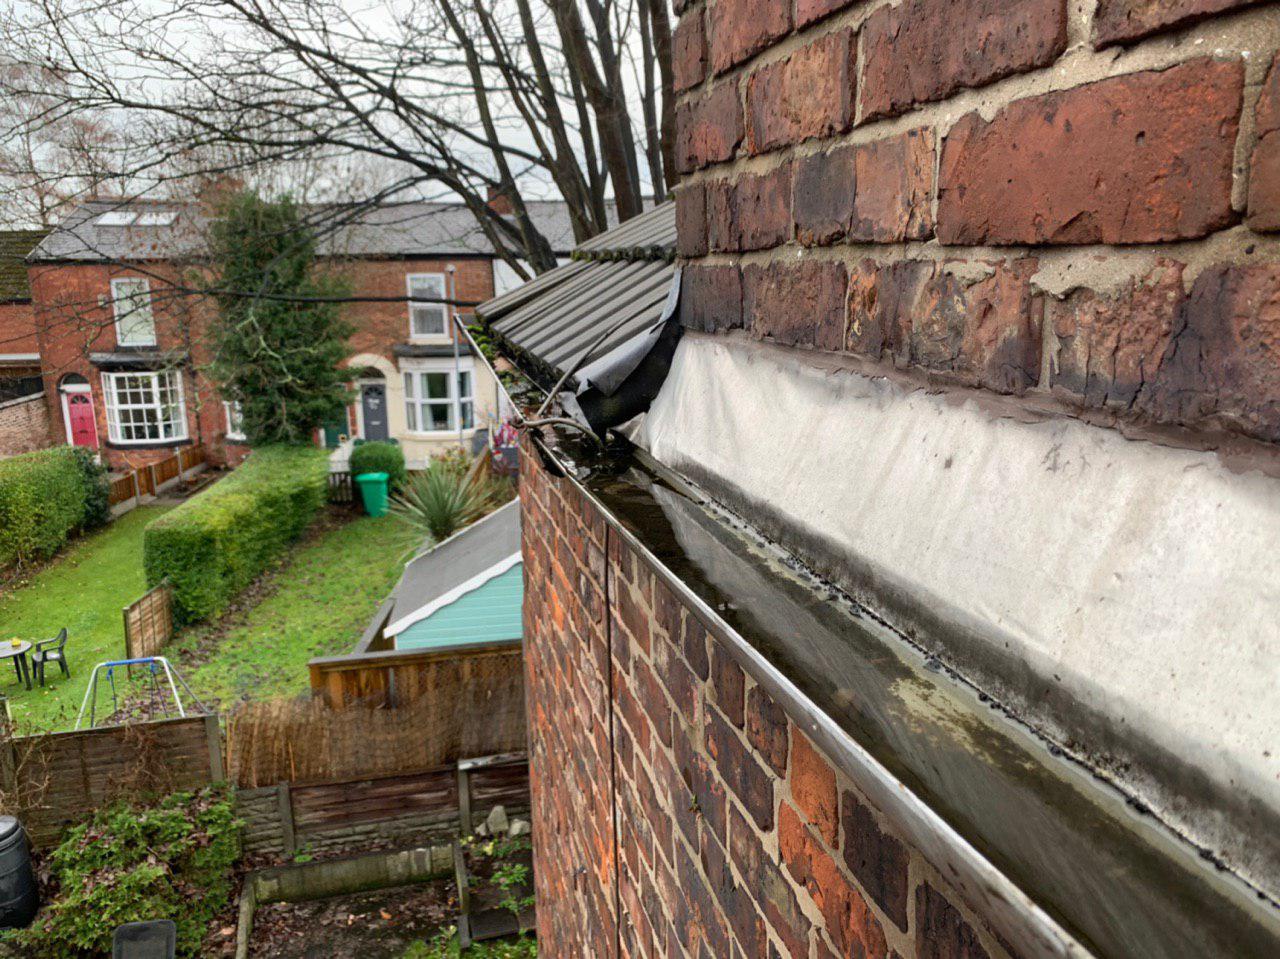 Gutters & down-pipes cleared out, we can repair or replace for new where required. Get your property ready for winter 2